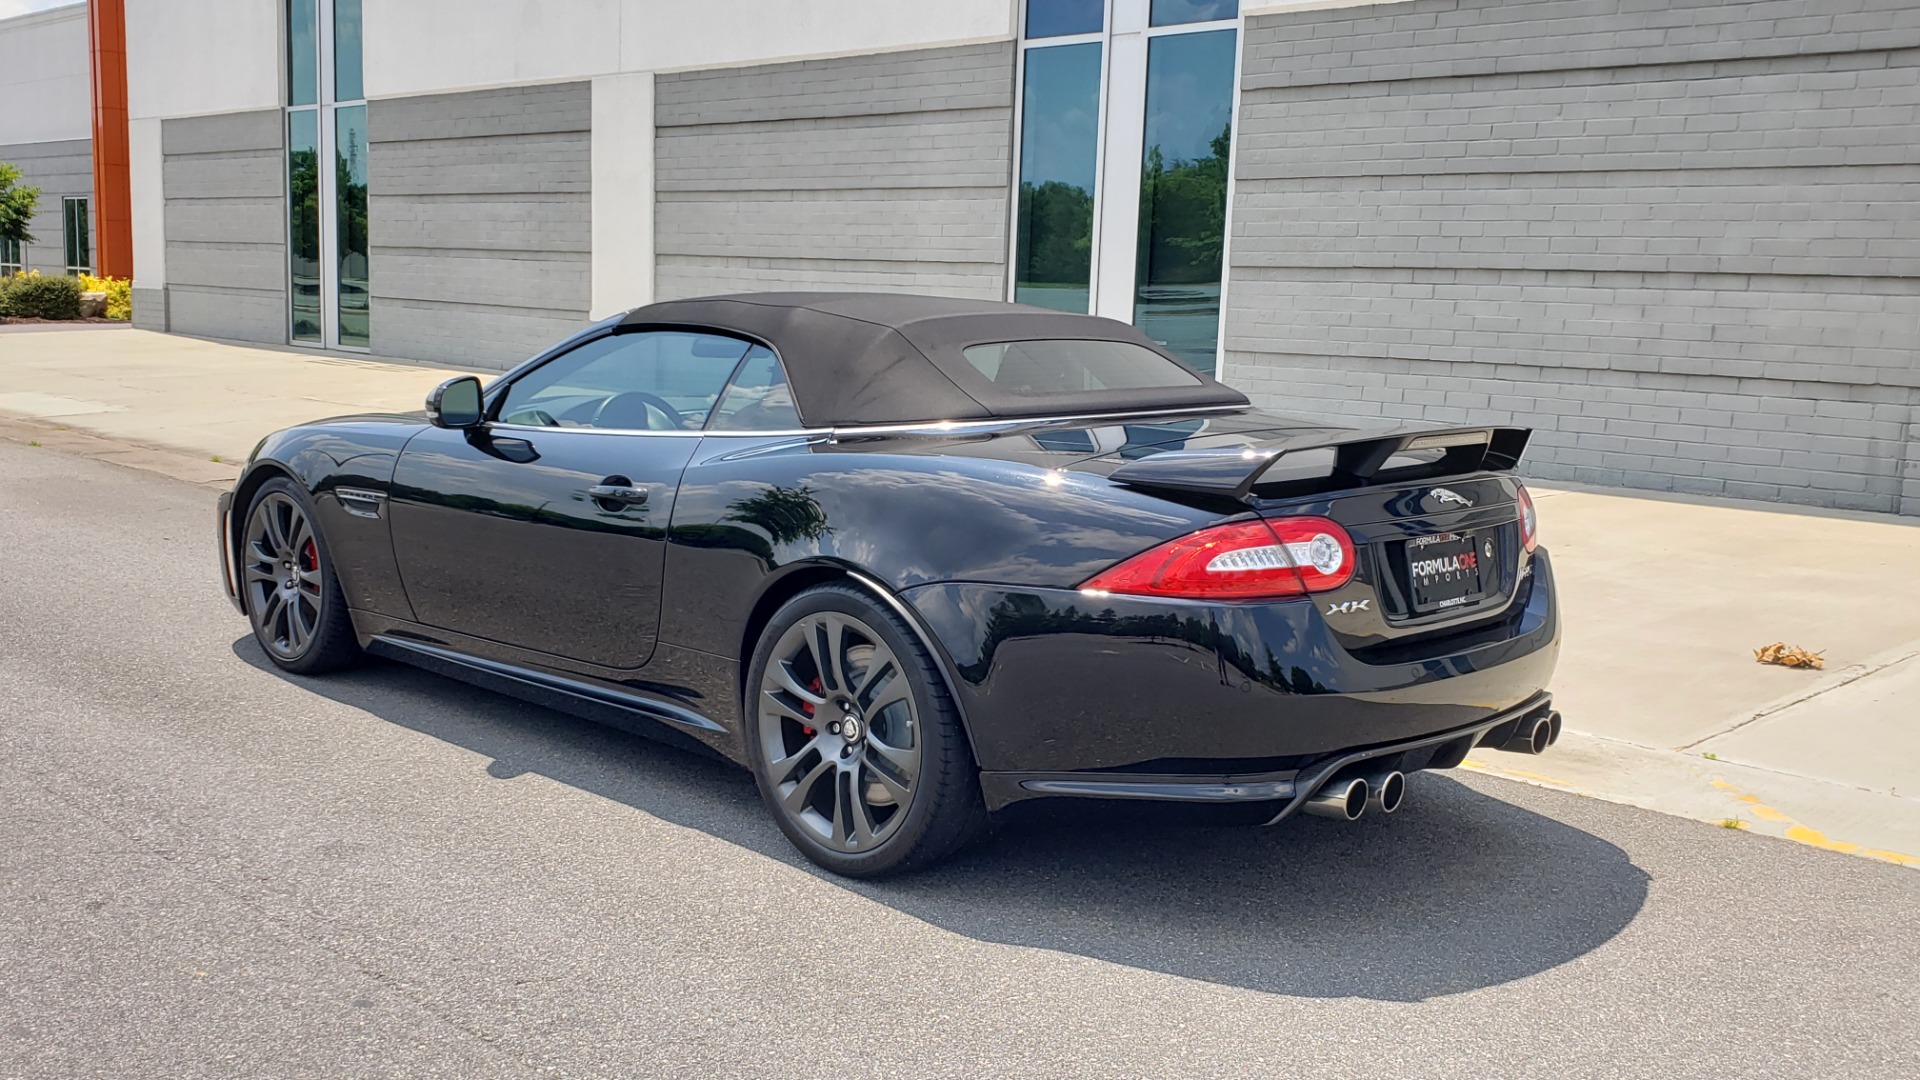 Used 2013 Jaguar XK R-S CONVERTIBLE / SC 5.0L V8 (550HP) / ZF 6-SPD AUTO / NAV / REARVIEW for sale Sold at Formula Imports in Charlotte NC 28227 9